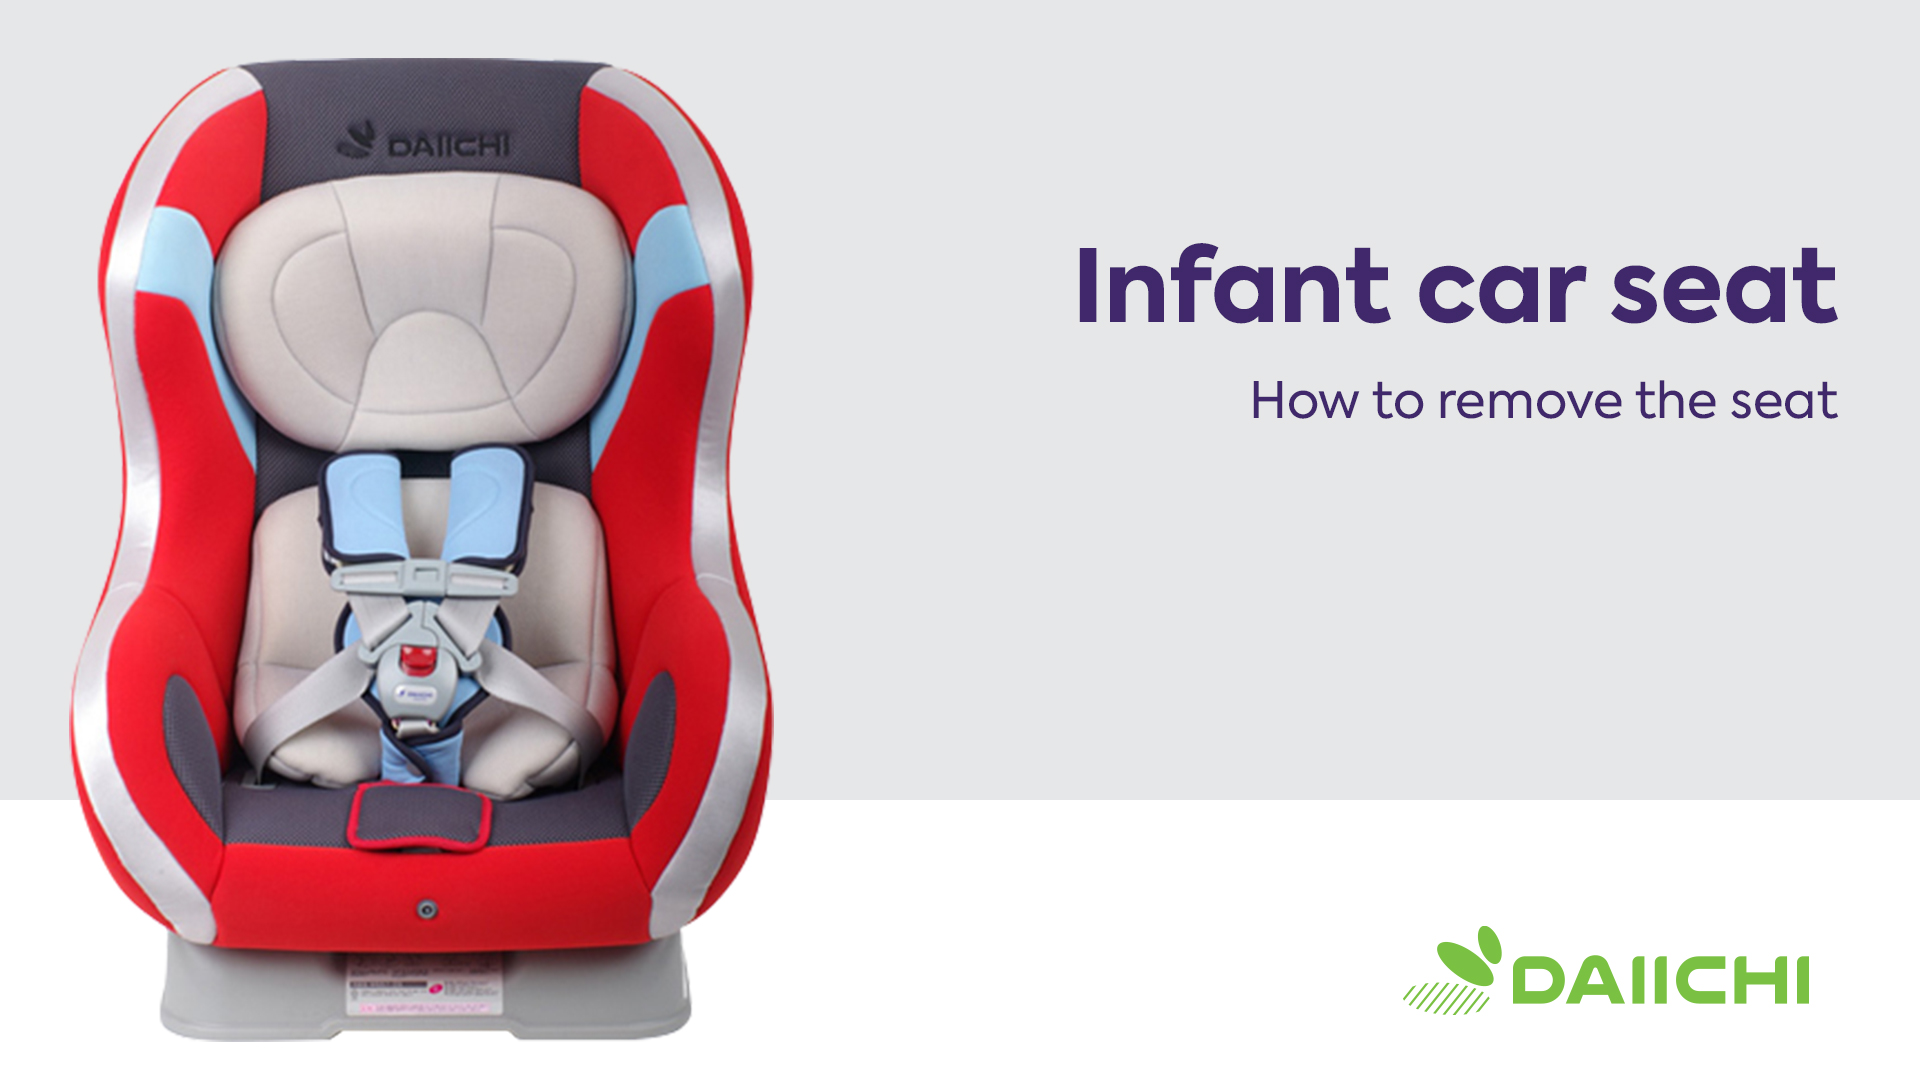 How to remove the Infant car seat